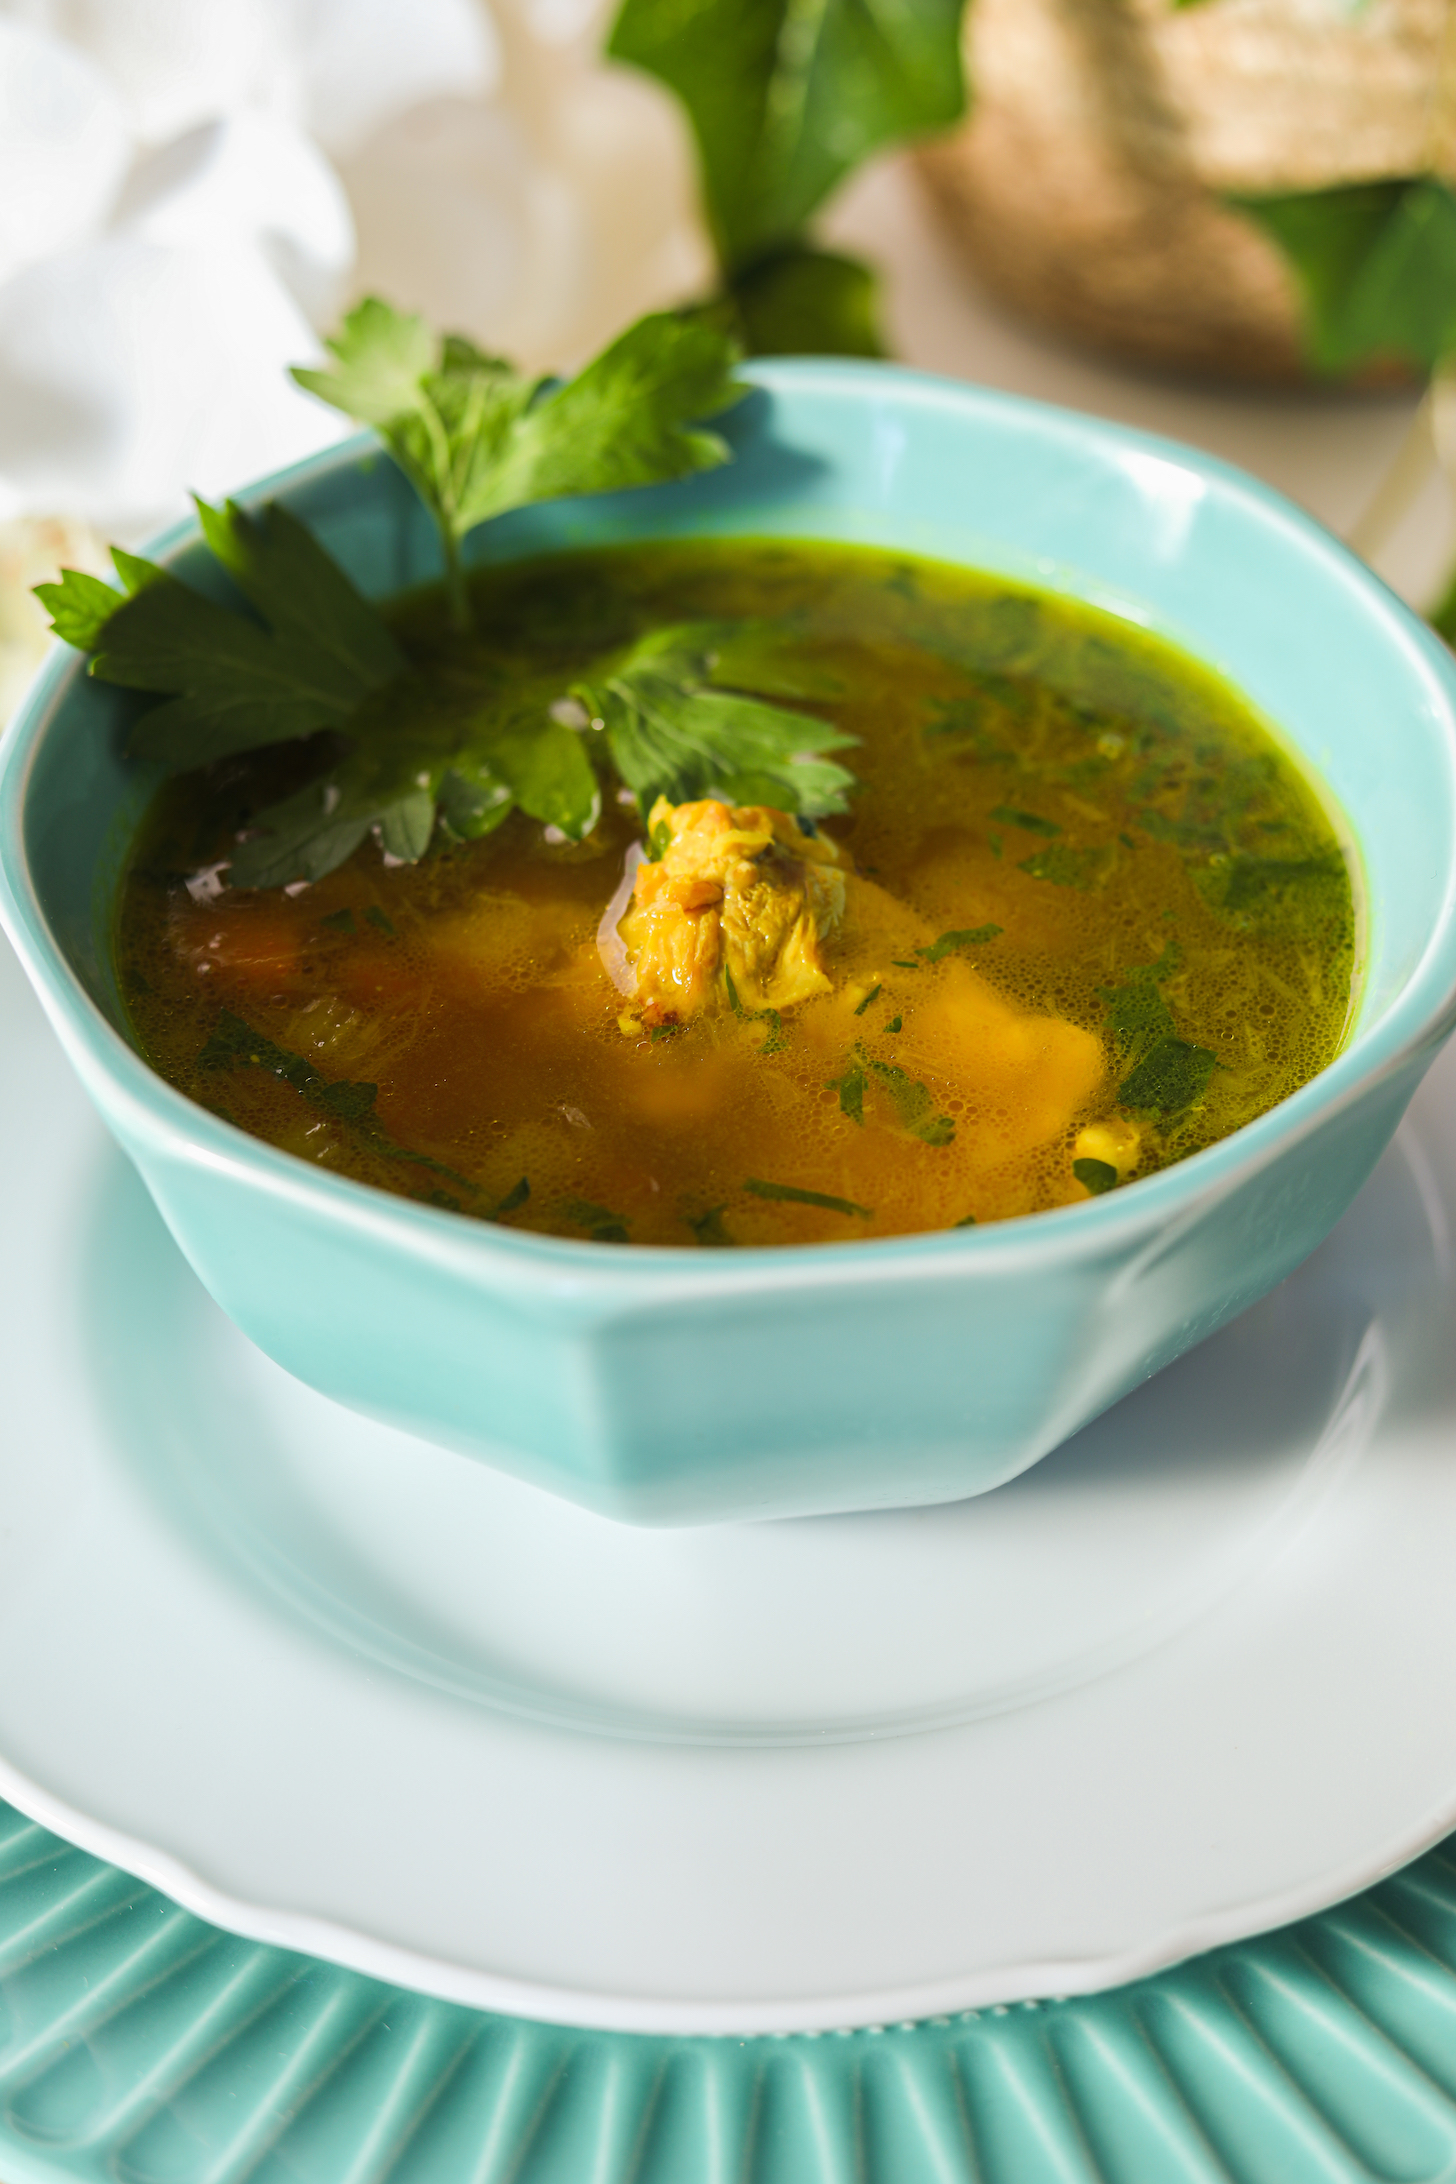 Perspective shot of a bowl of brown soup on a white plate topped with parsley leaf.